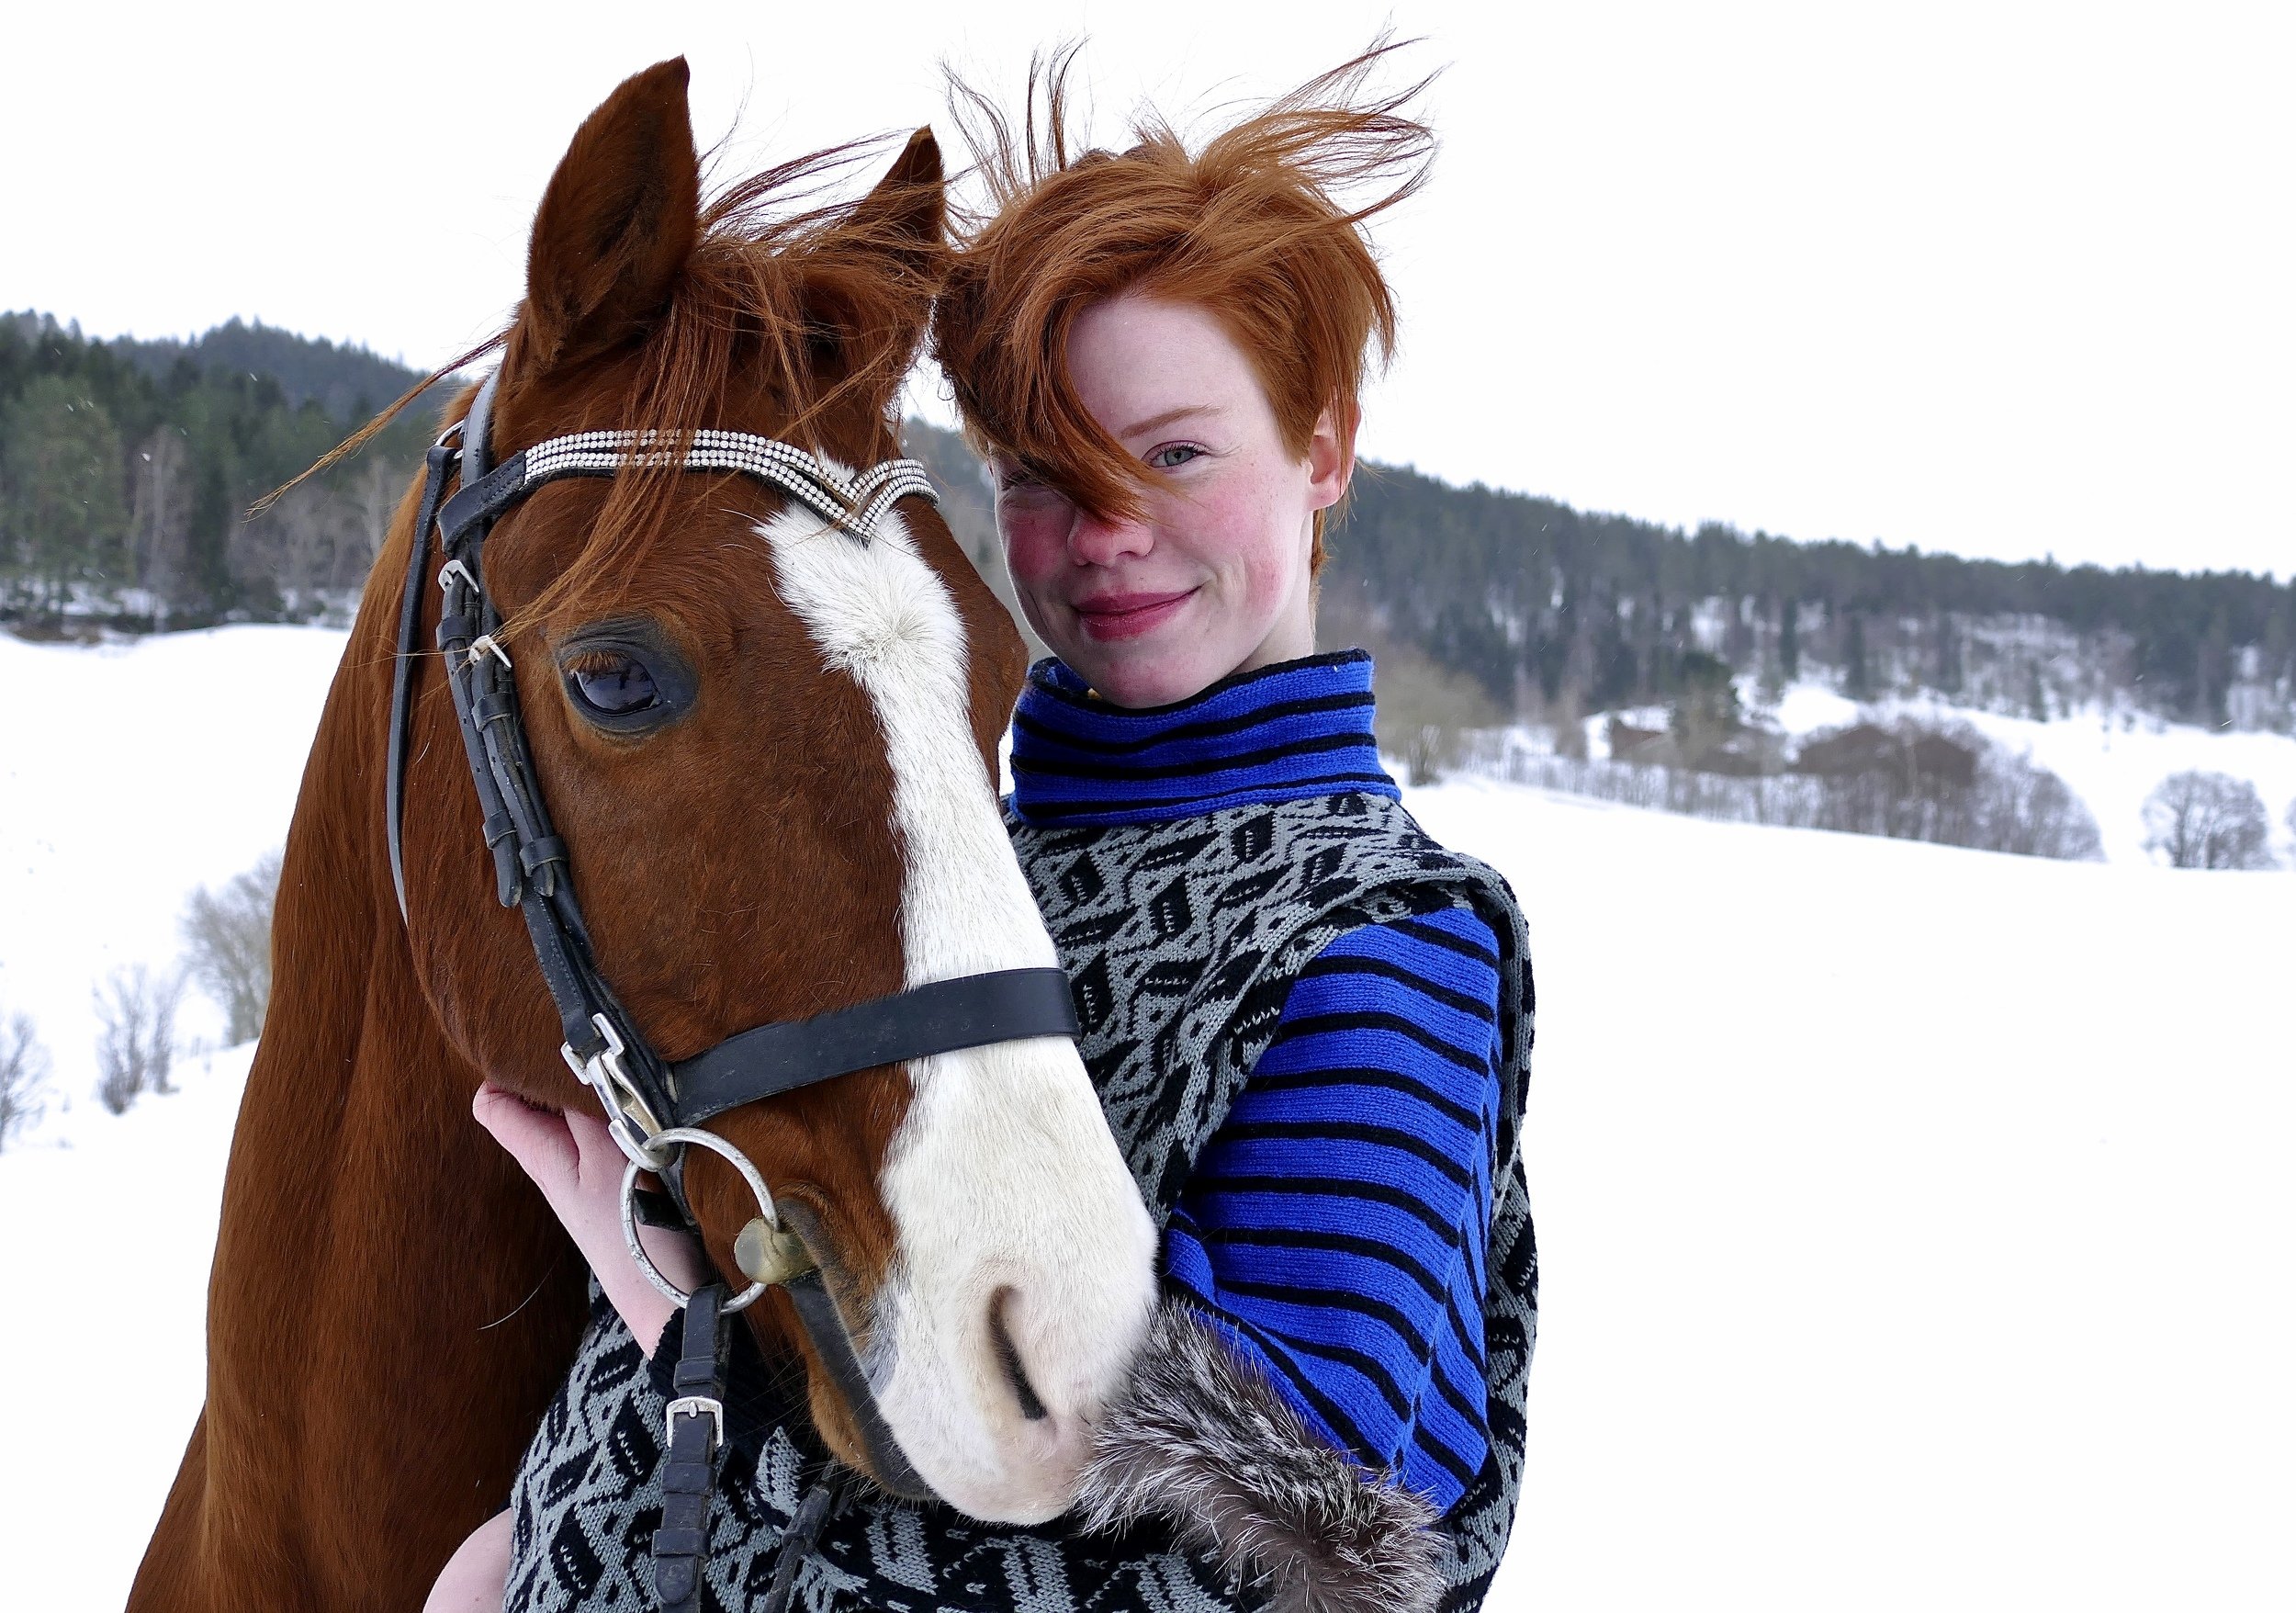 portrait, animals, horse, norway, colors, winter, forest, friend, people, bangs, friendship, blue, young, snow, red, Svetlana Povarova Ree